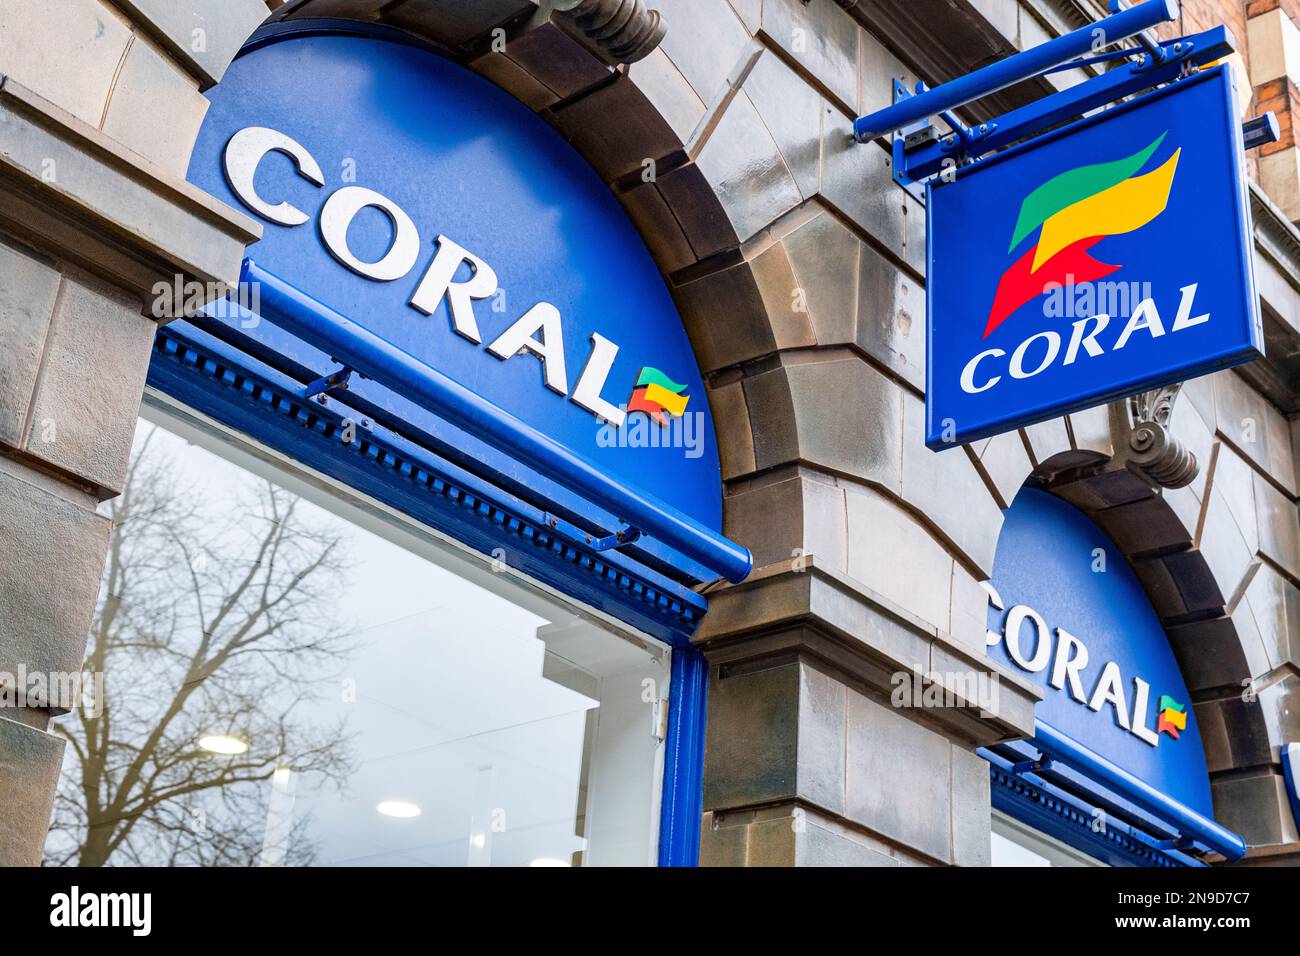 Coral betting shop sign or logo on outside wall UK Stock Photo